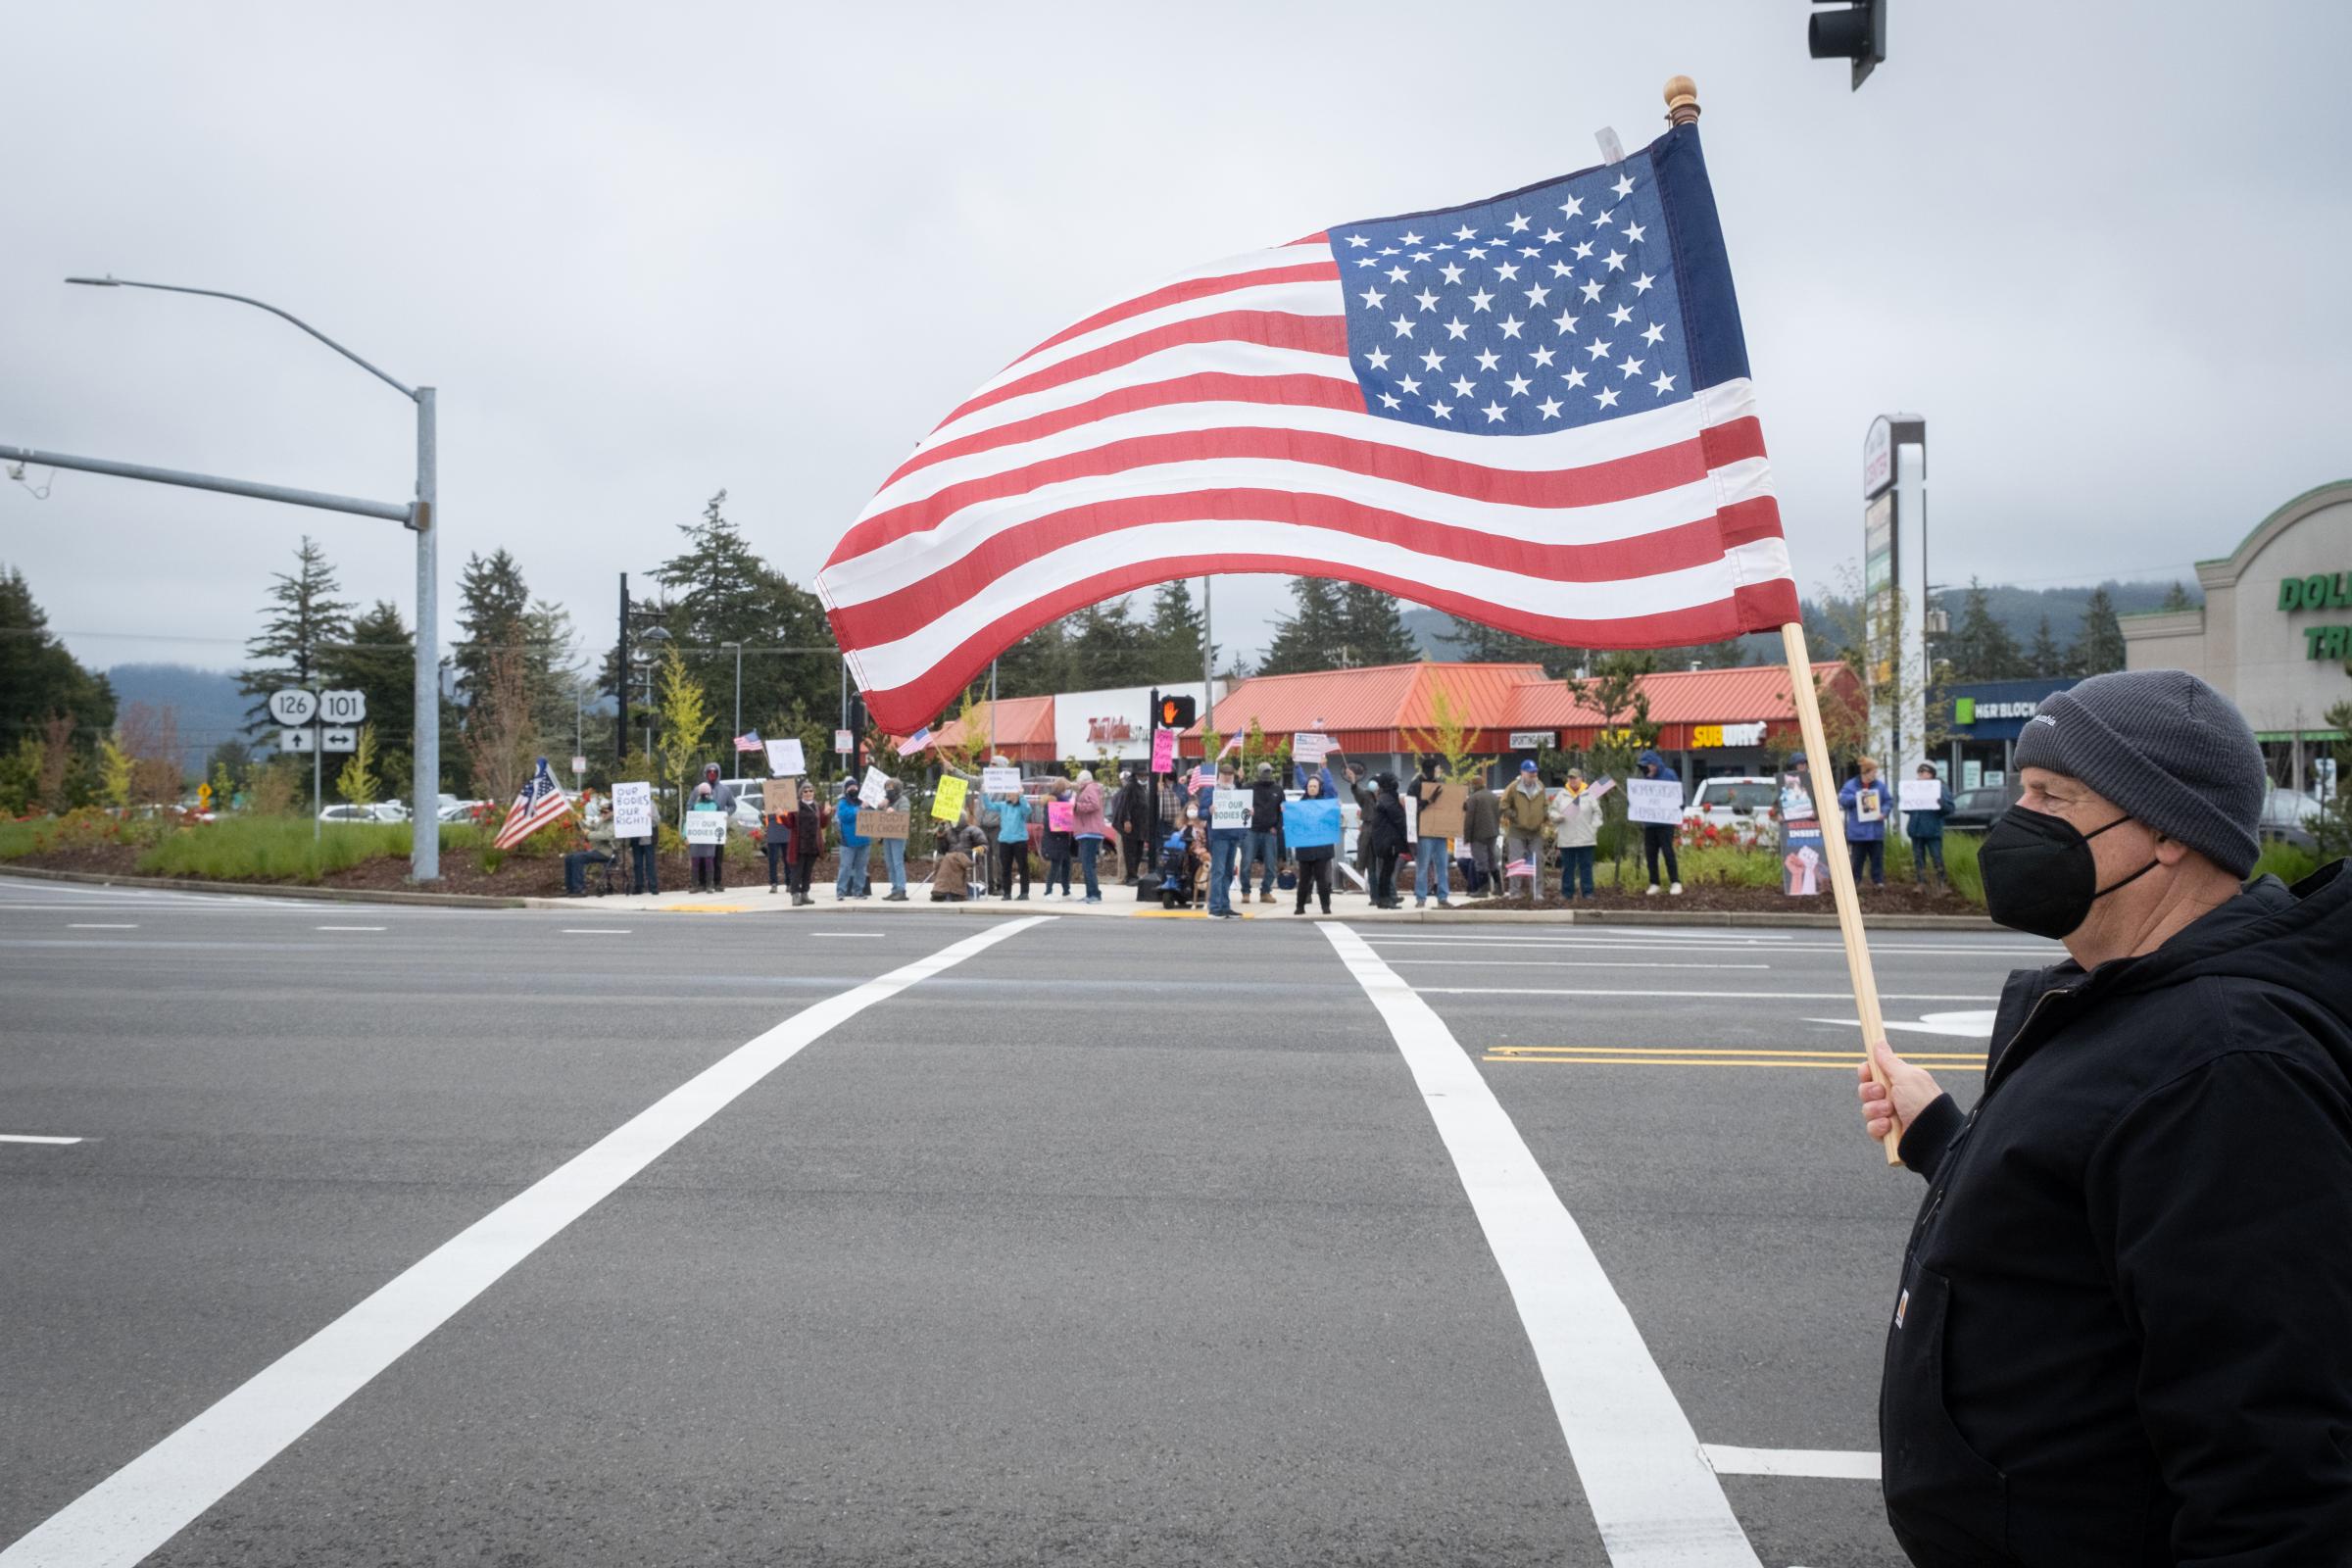 Bans Off Our Bodies Rally Florence Oregon - Man with American Flag on Highways 101 and 126, Bans Off Our Bodies protest, Florence Oregon, May...